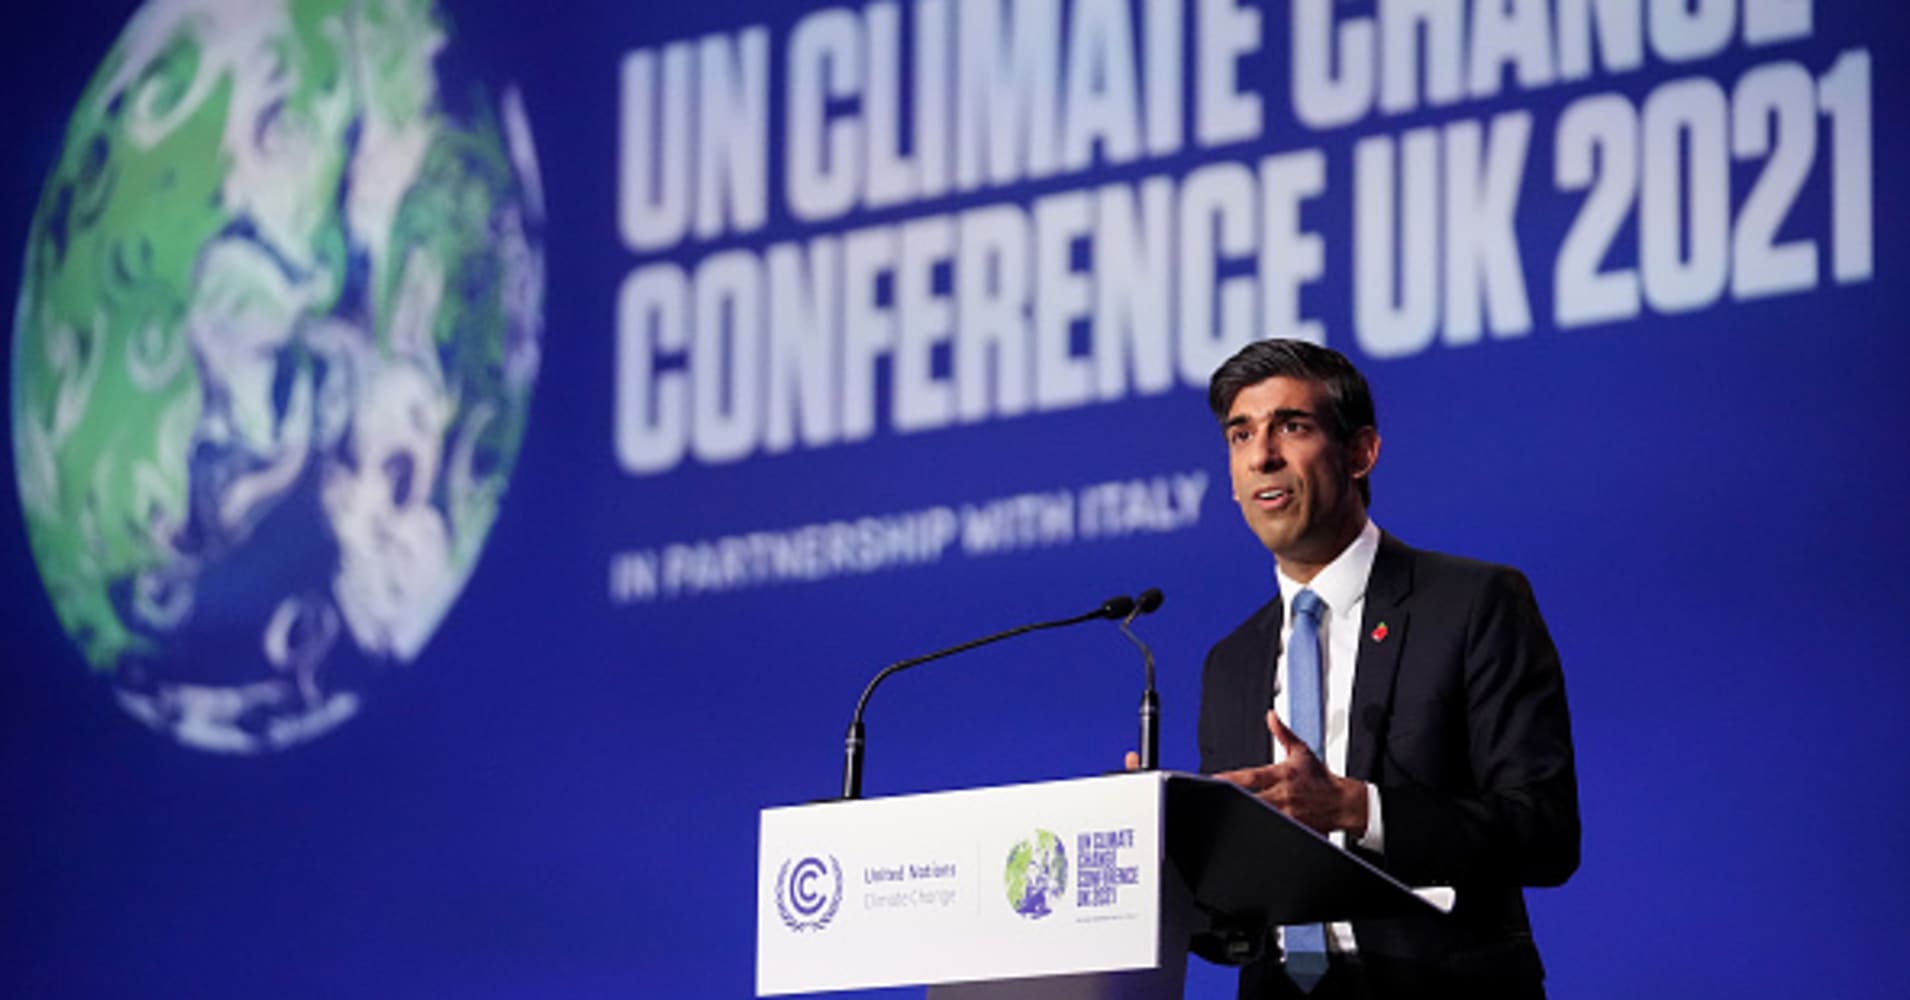 U.K. Chancellor of the Exchequer, Rishi Sunak, delivers a keynote speech to COP26 delegates at SECC on November 03, 2021 in Glasgow, Scotland.